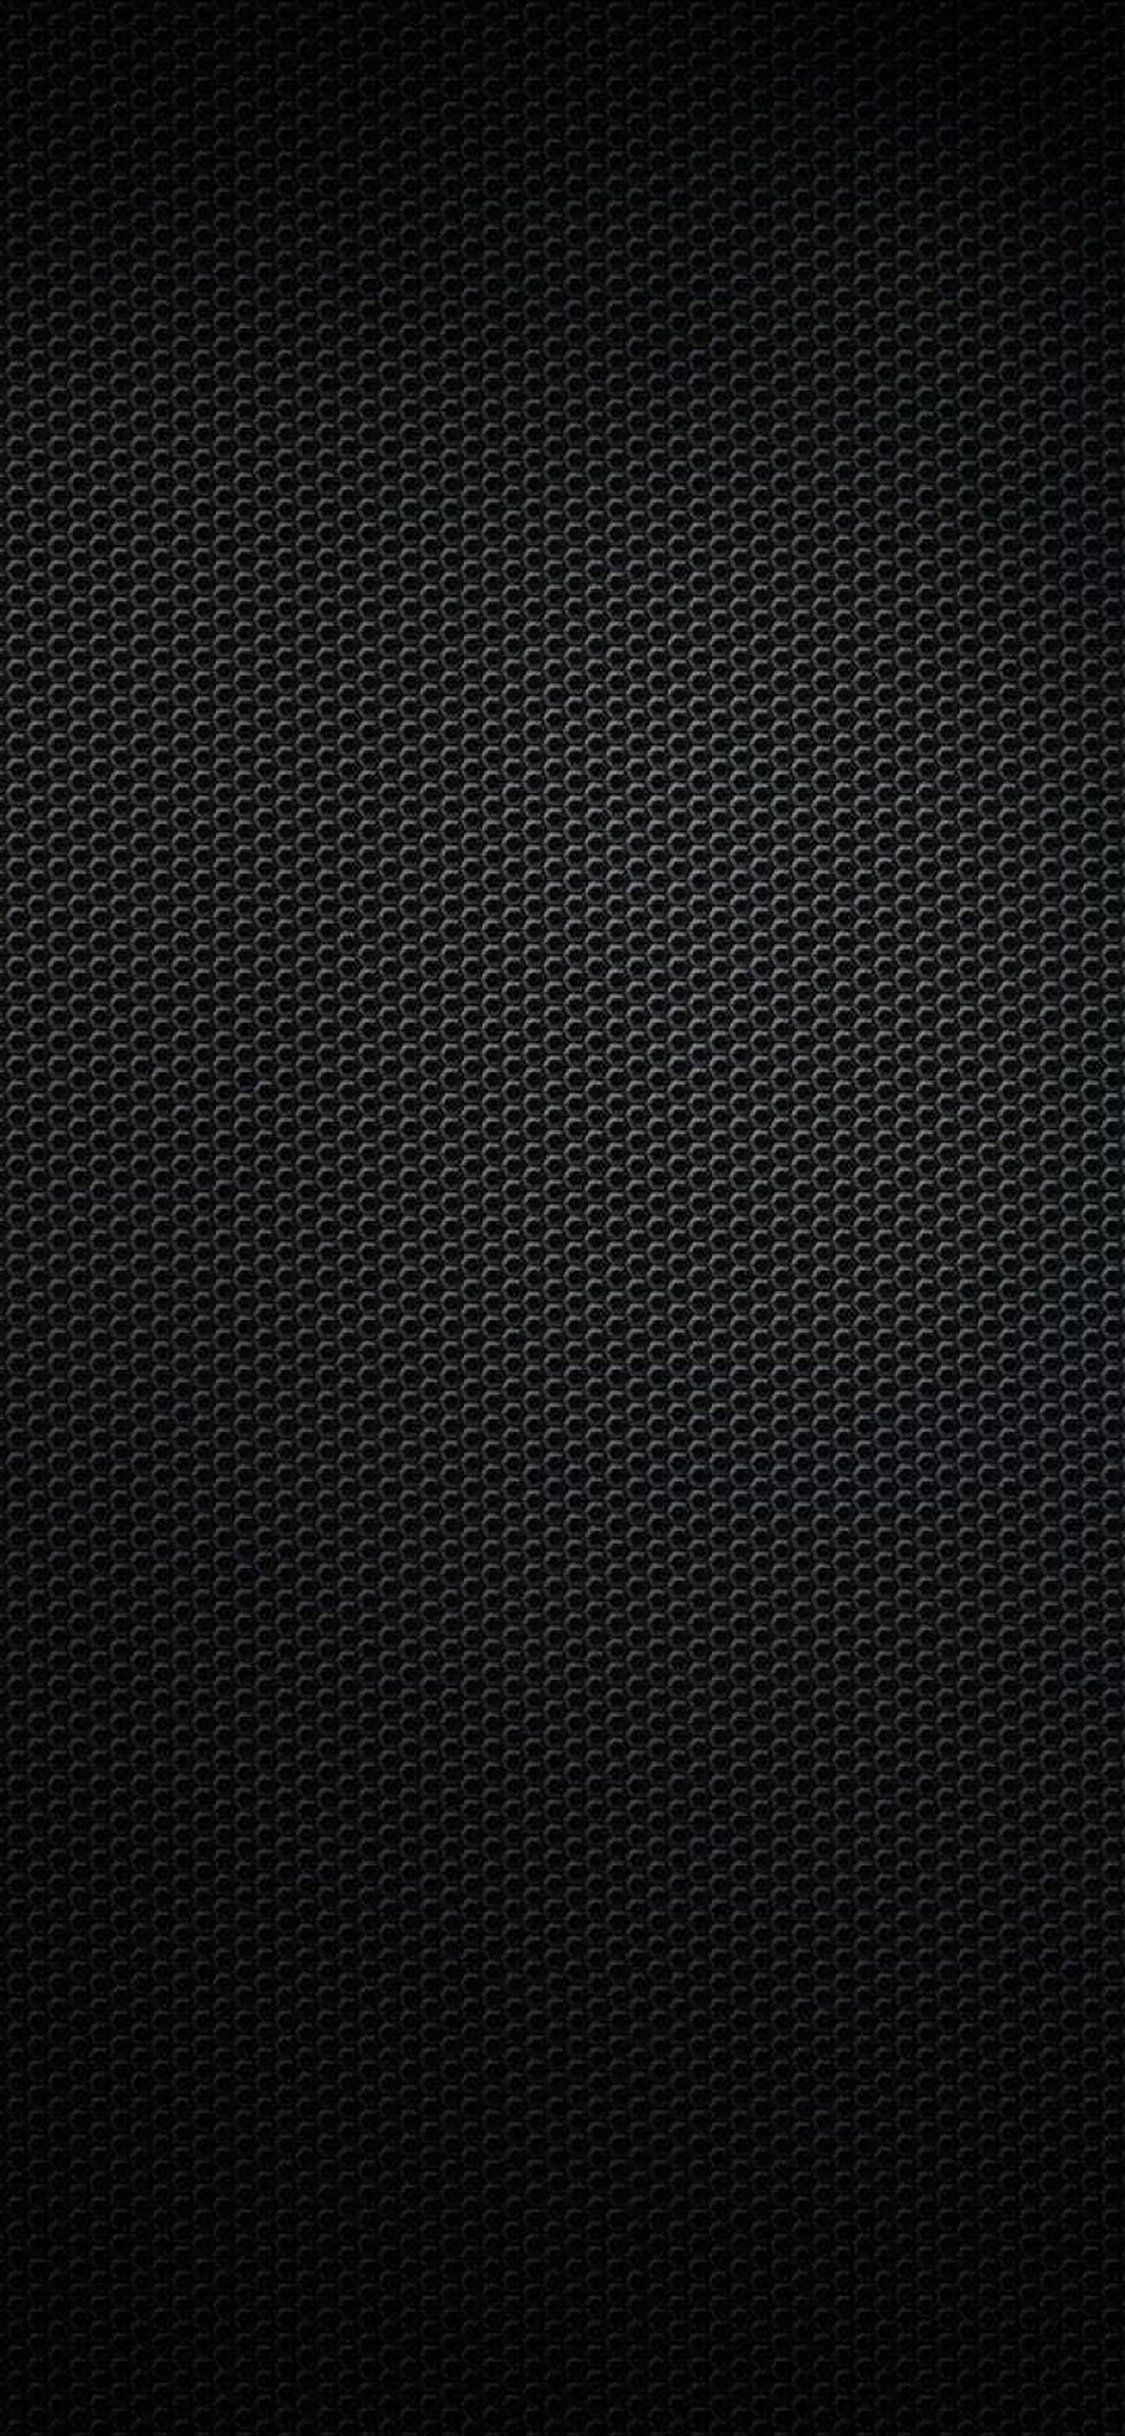 iPhone 11 grid wallpaper Marques brownlee this iphone wallpaper so satisfying